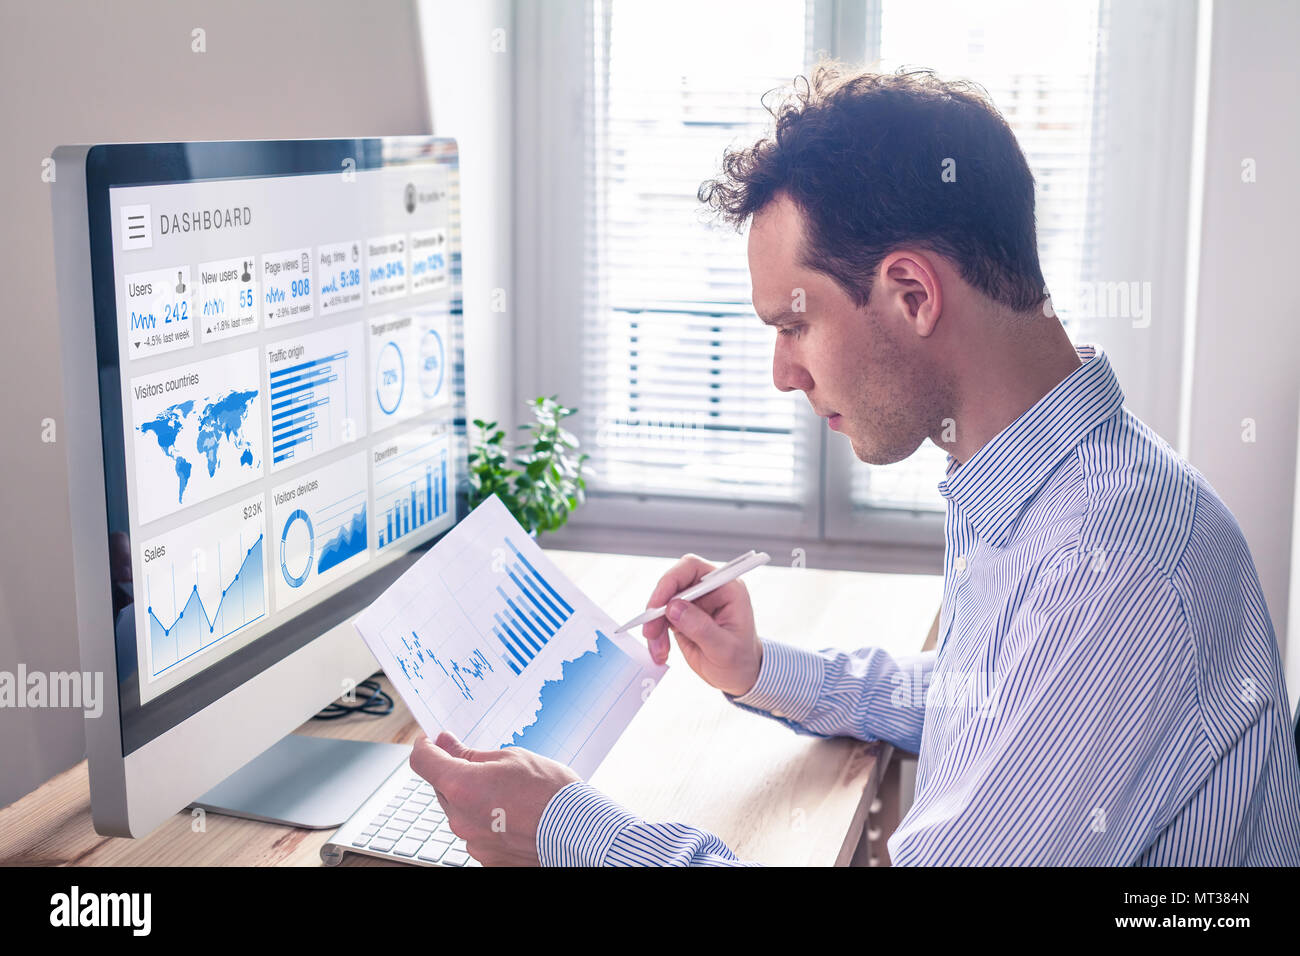 Digital marketing analytics technology with metrics and key performance indicators dashboard on computer screen, person analyzing data chart and adver Stock Photo